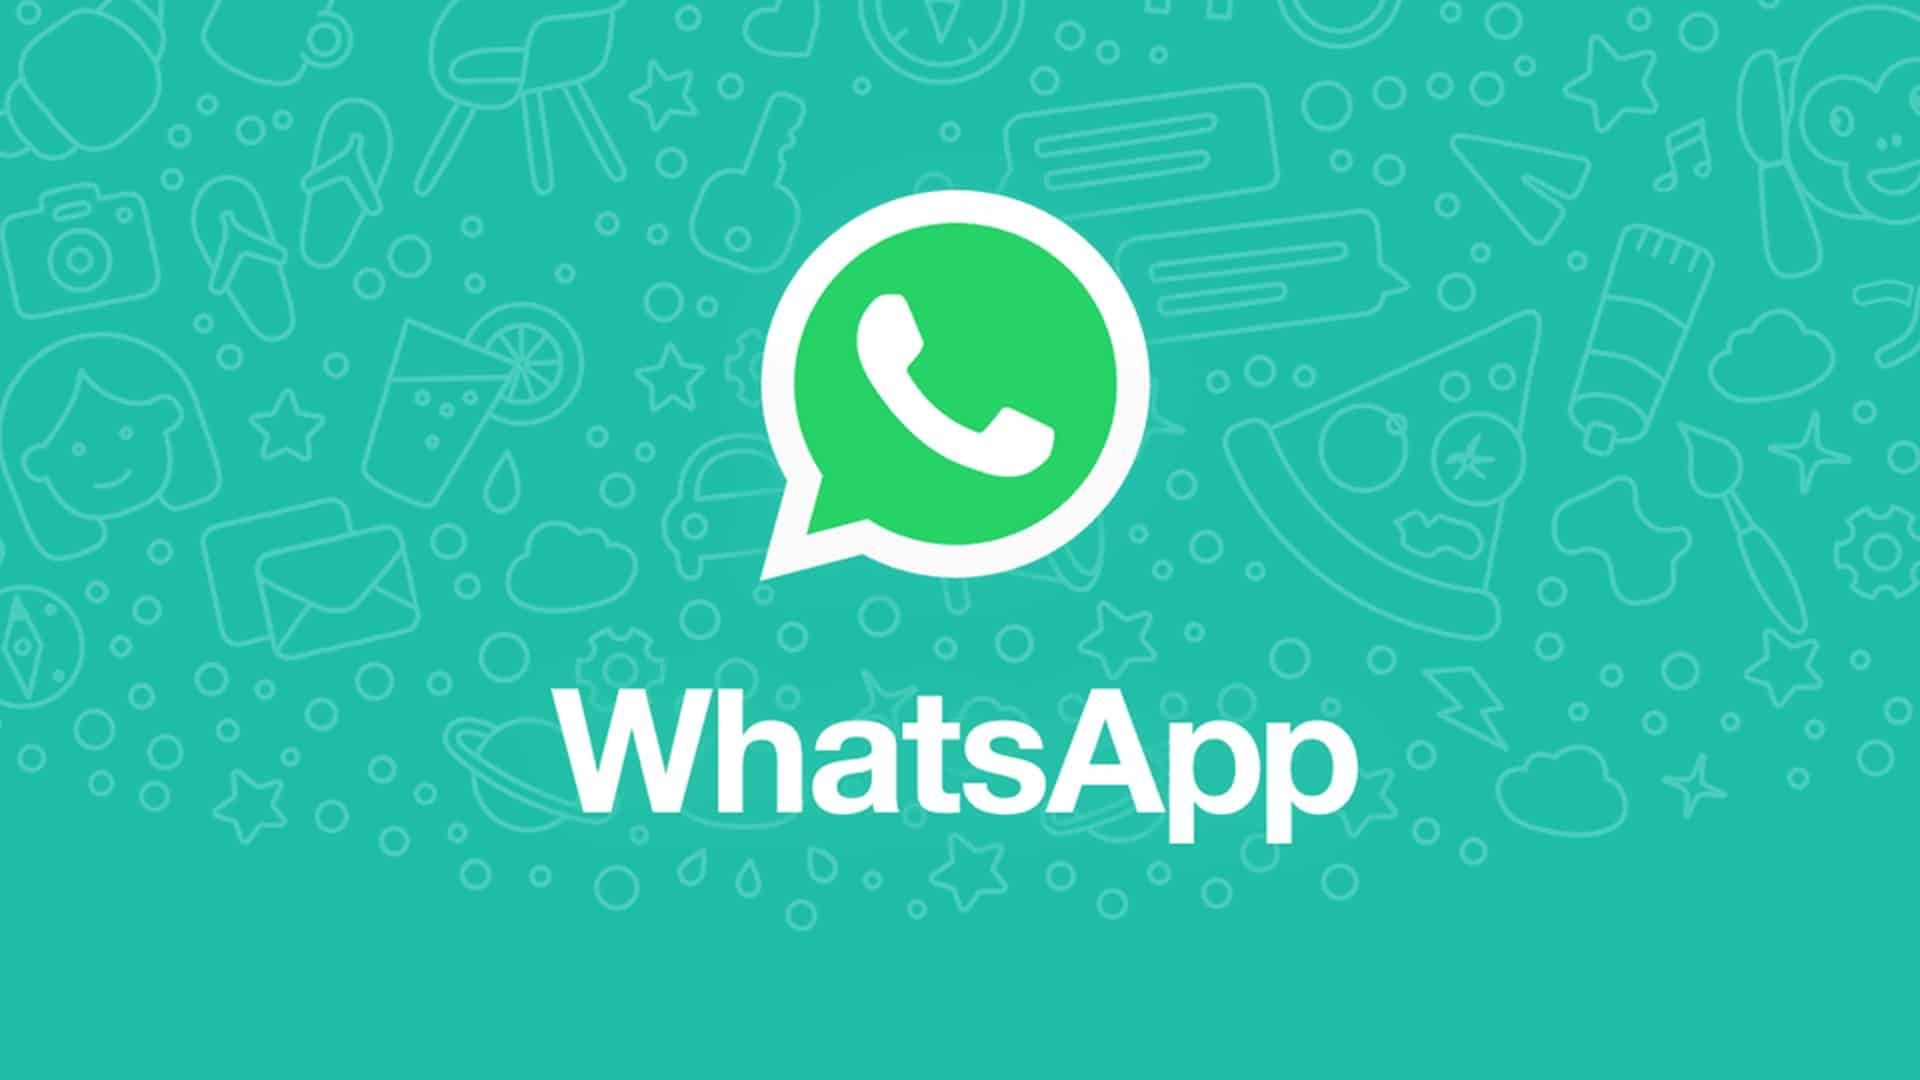 WhatsApp to offer end-to-end encryption option for backups